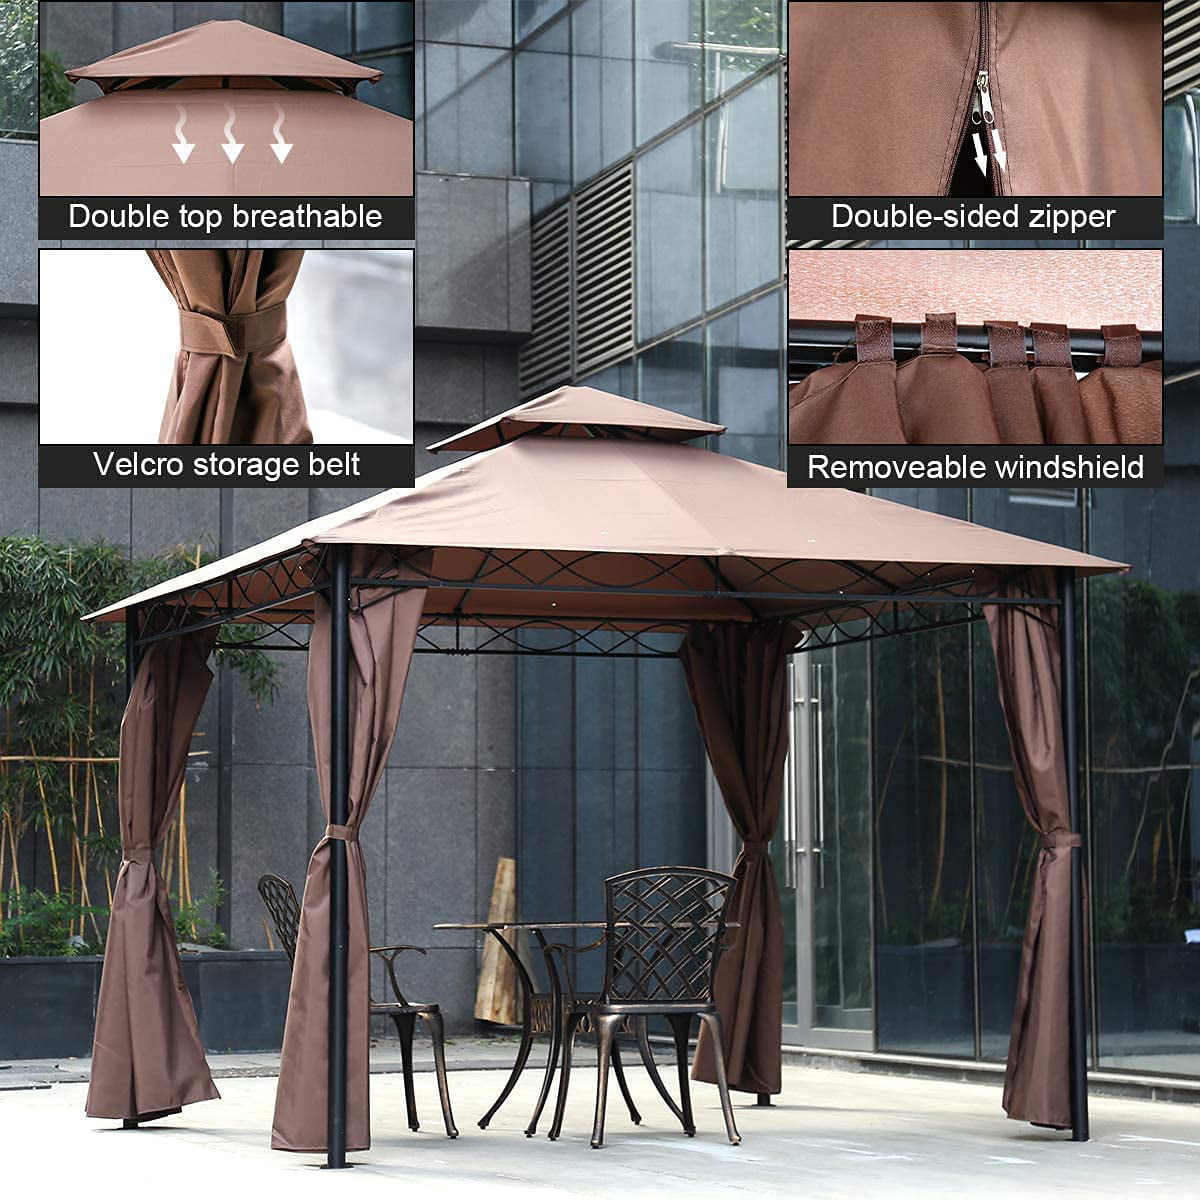 10’x13’ Square Gazebo Canopy Tent with Frame and Fabric, Heavy Duty Patio Outdoor Canopy Tent,Waterproof Outdoor Tents for Backyard Double Roof Vented Gazebo Canopy Tent For BBQ,Family Activity, Party